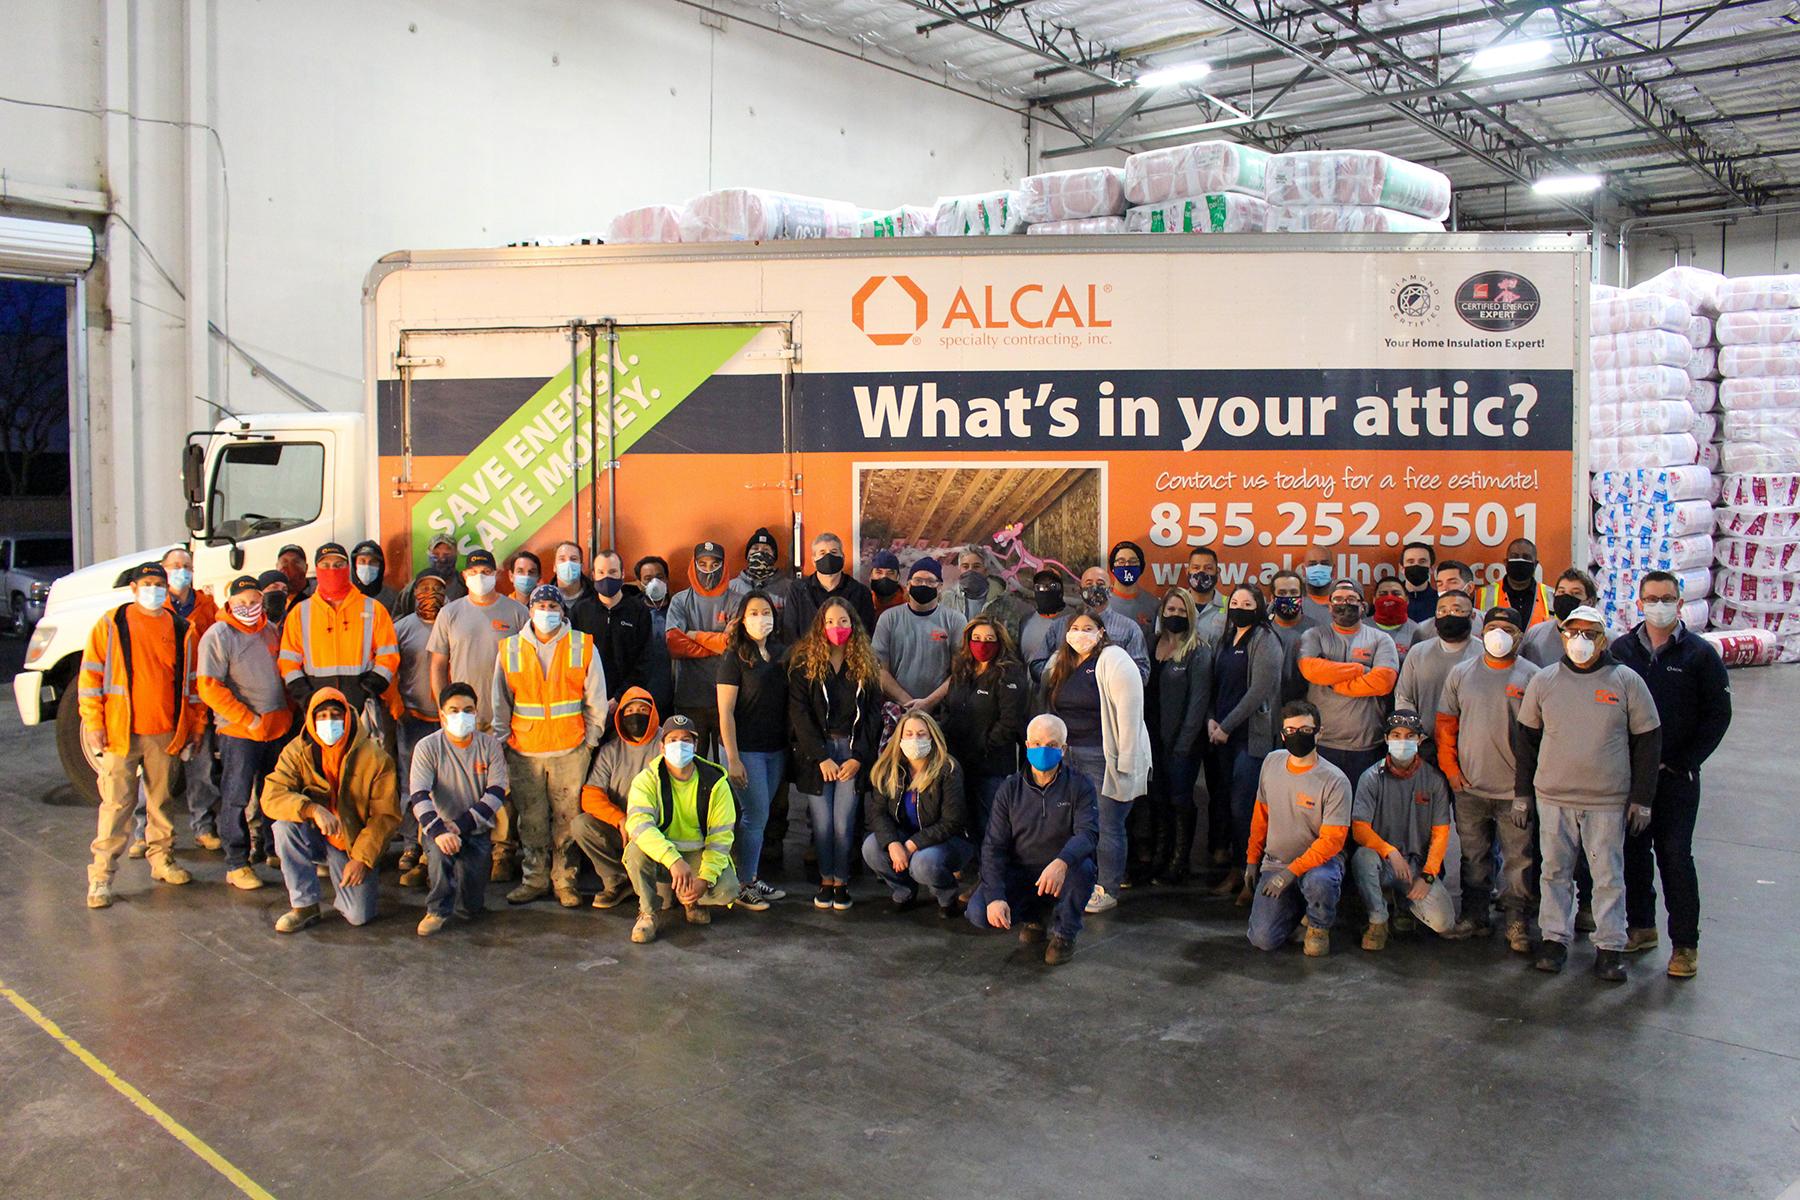 Picture of Alcal Specialty Contracting Inc. - Alcal Specialty Contracting, Inc.